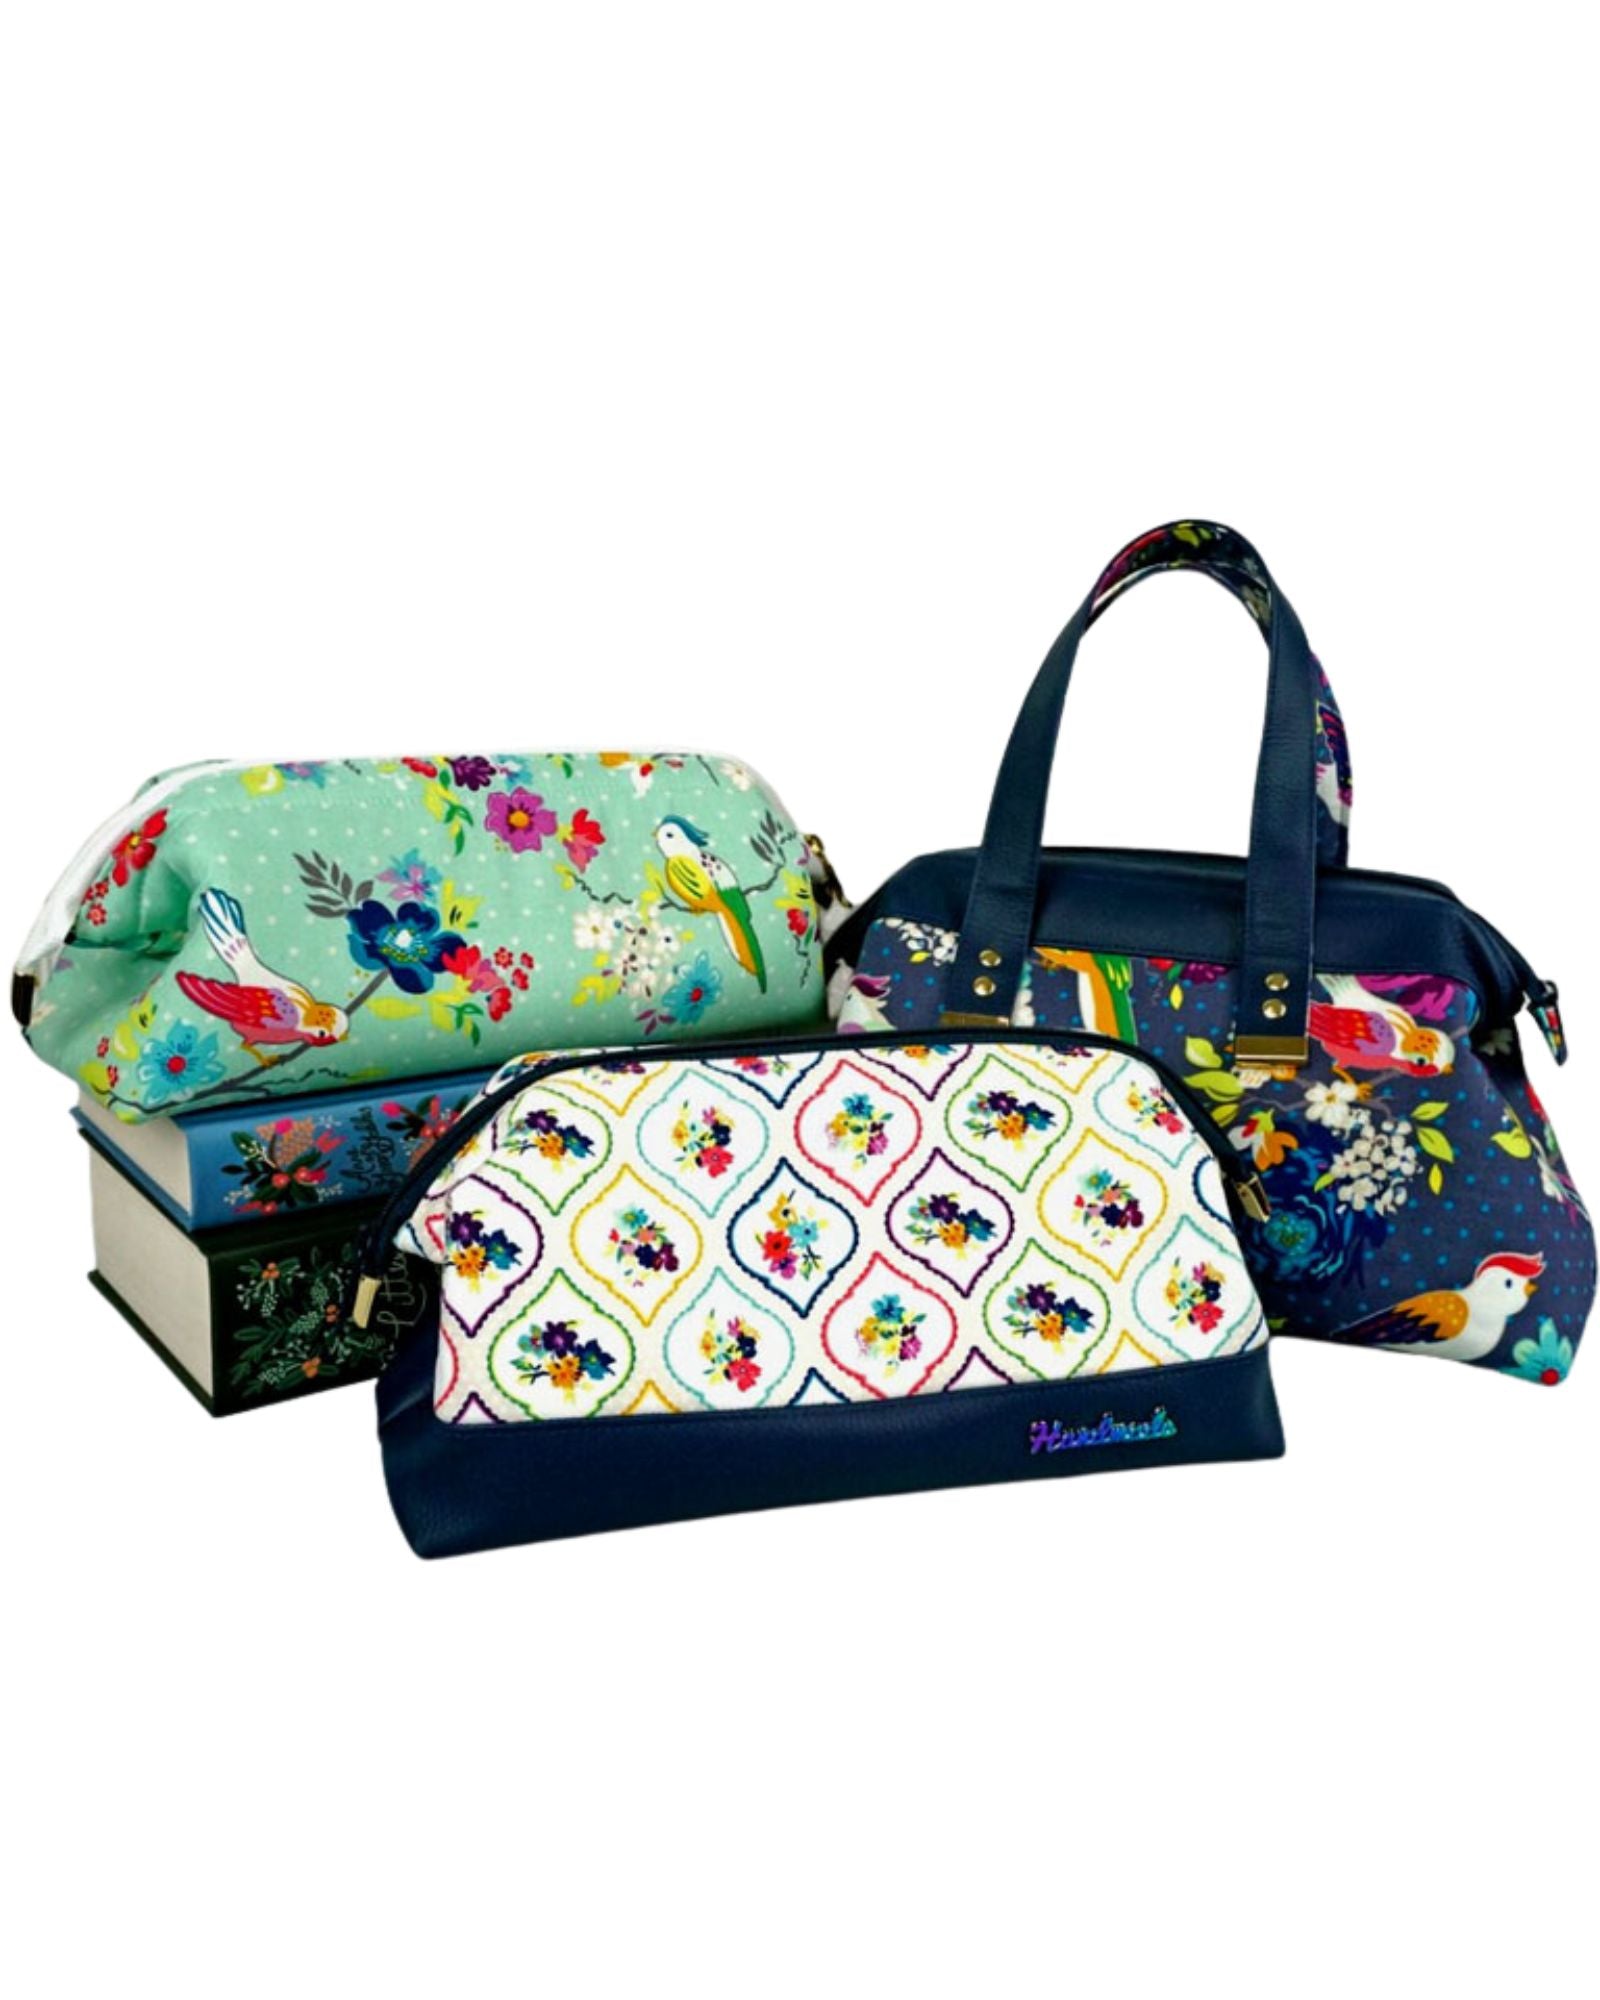 Trifecta Zip Bag Extravaganza: Versatile Pattern in Six Sizes - Perfect for Every Need